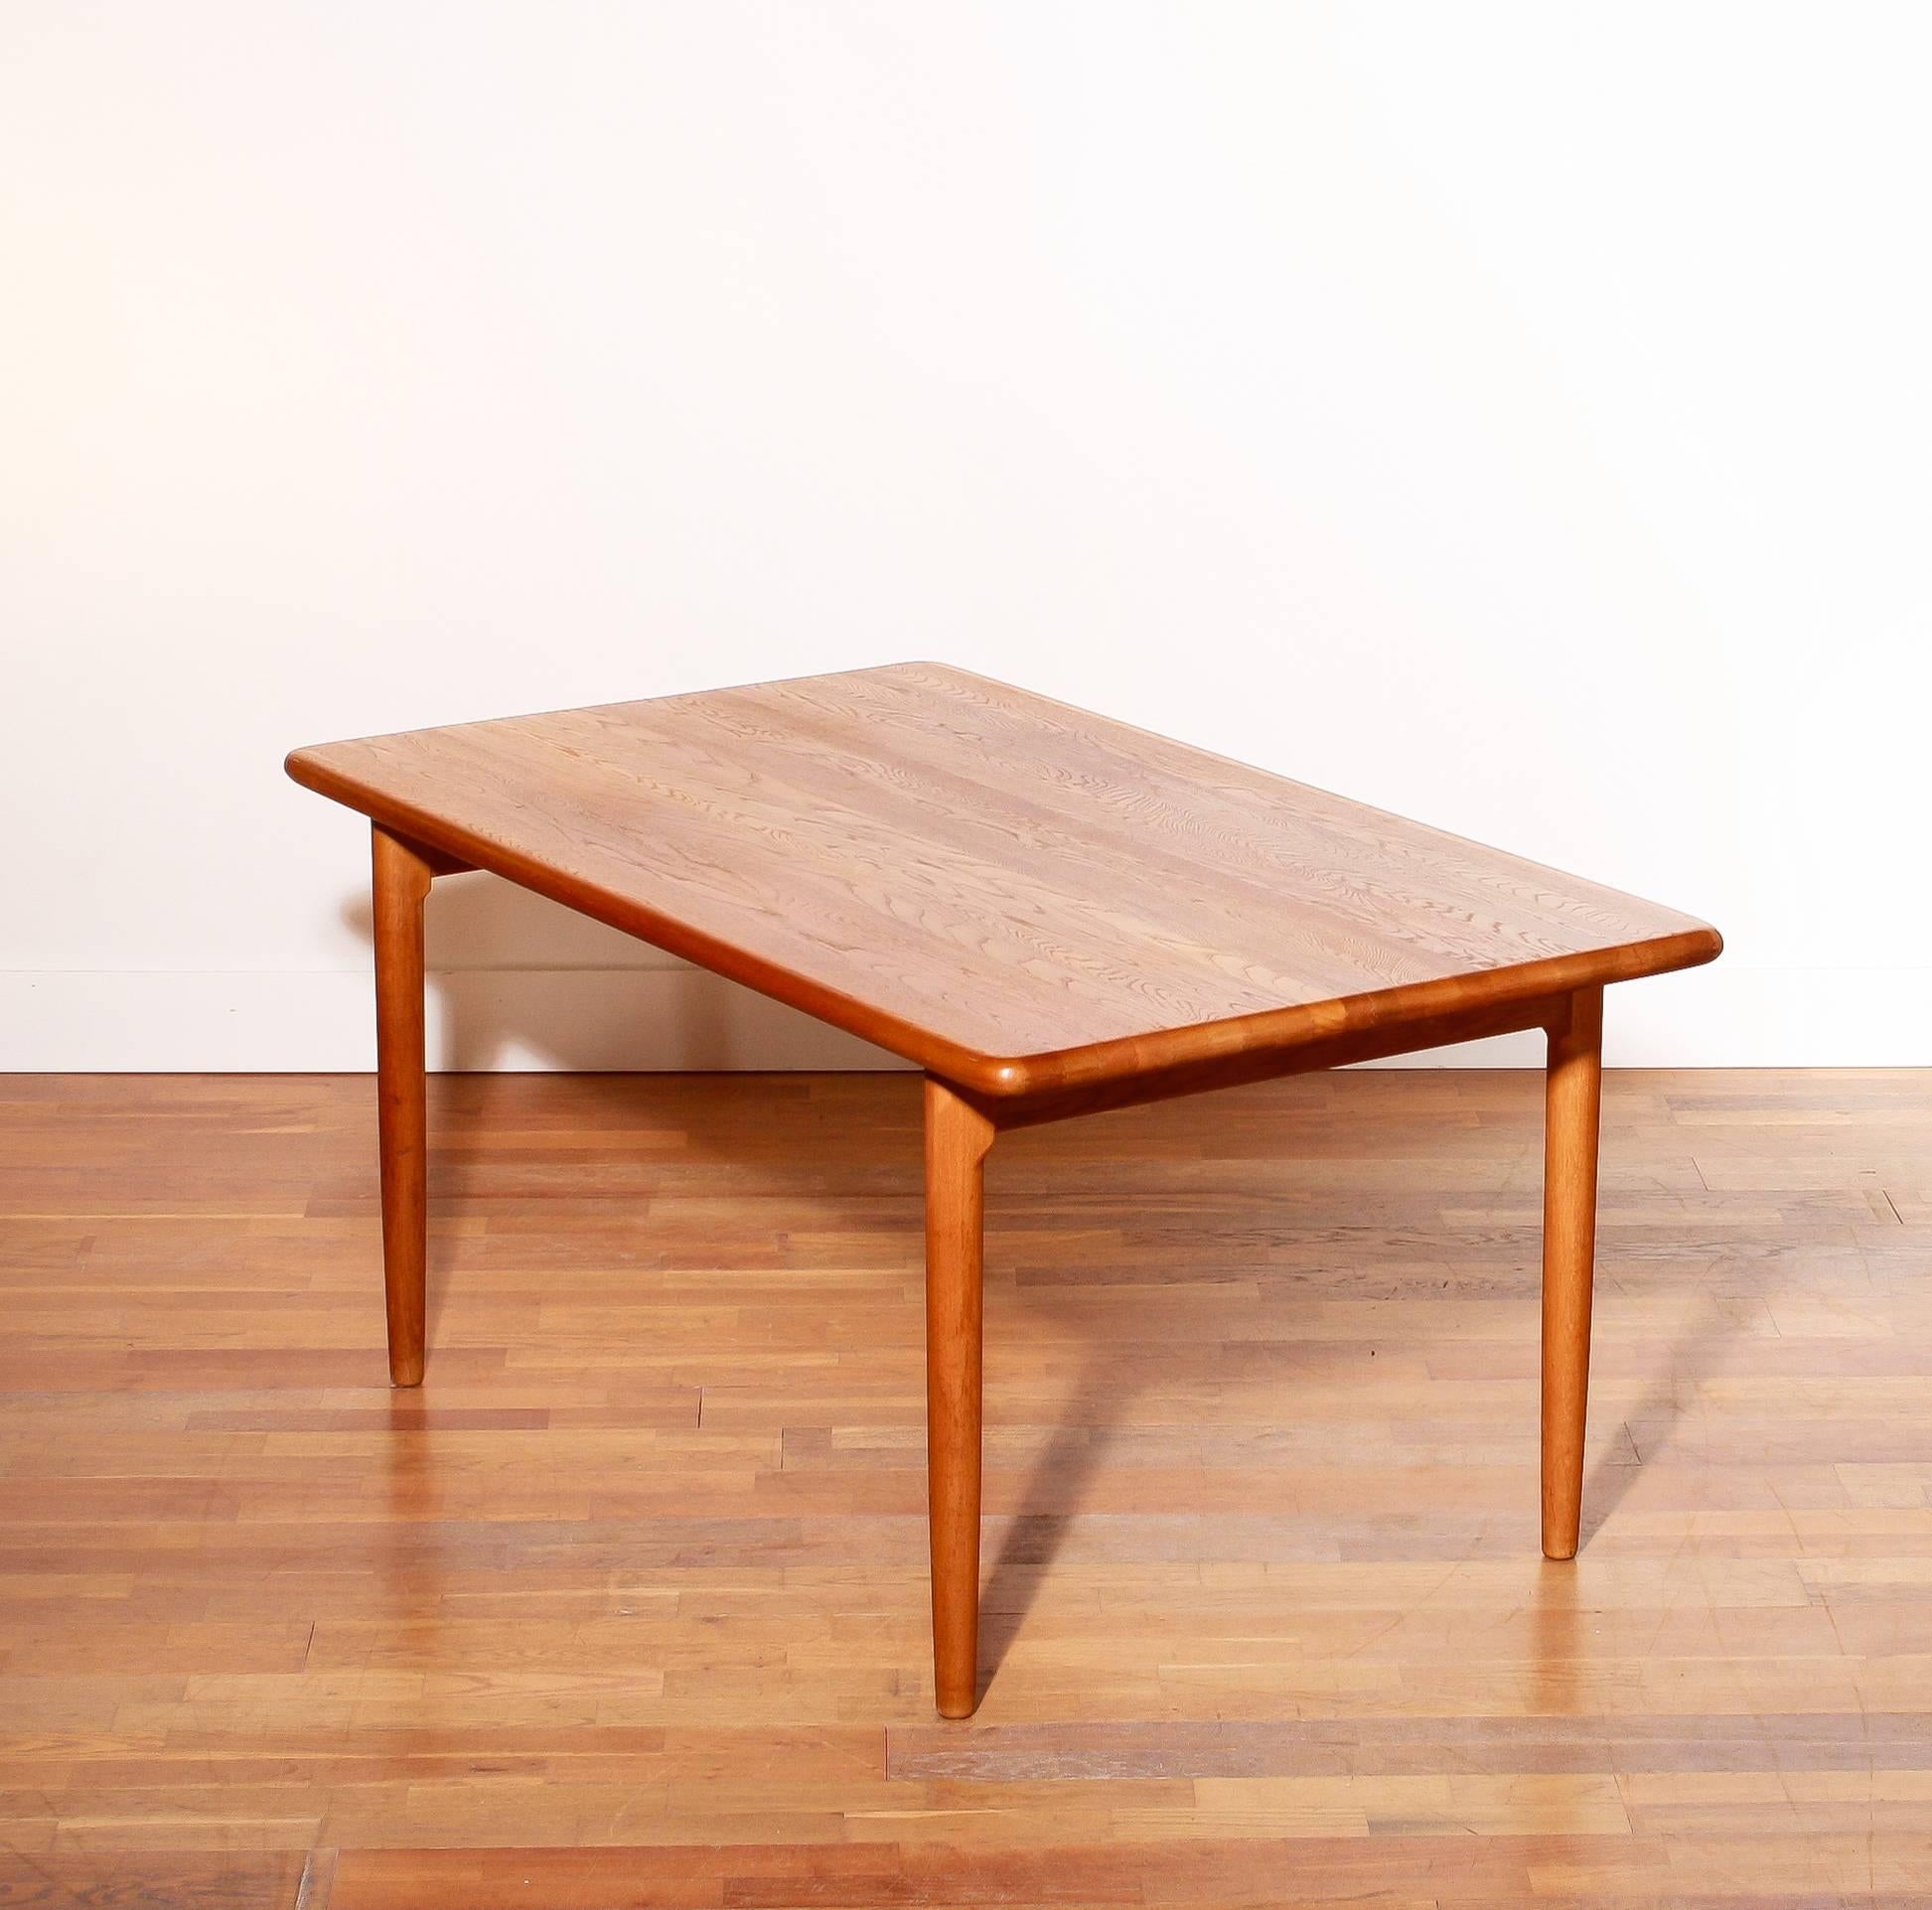 Beautiful oak table designed by Niels Otto Møller and made by JL Møller Møbelfabrik, Denmark.
This table is in excellent condition. 
The very simplicity makes the table beautiful.
Period 1954. 
The dimensions are D 90 cm, W 149 cm, H 73 cm.